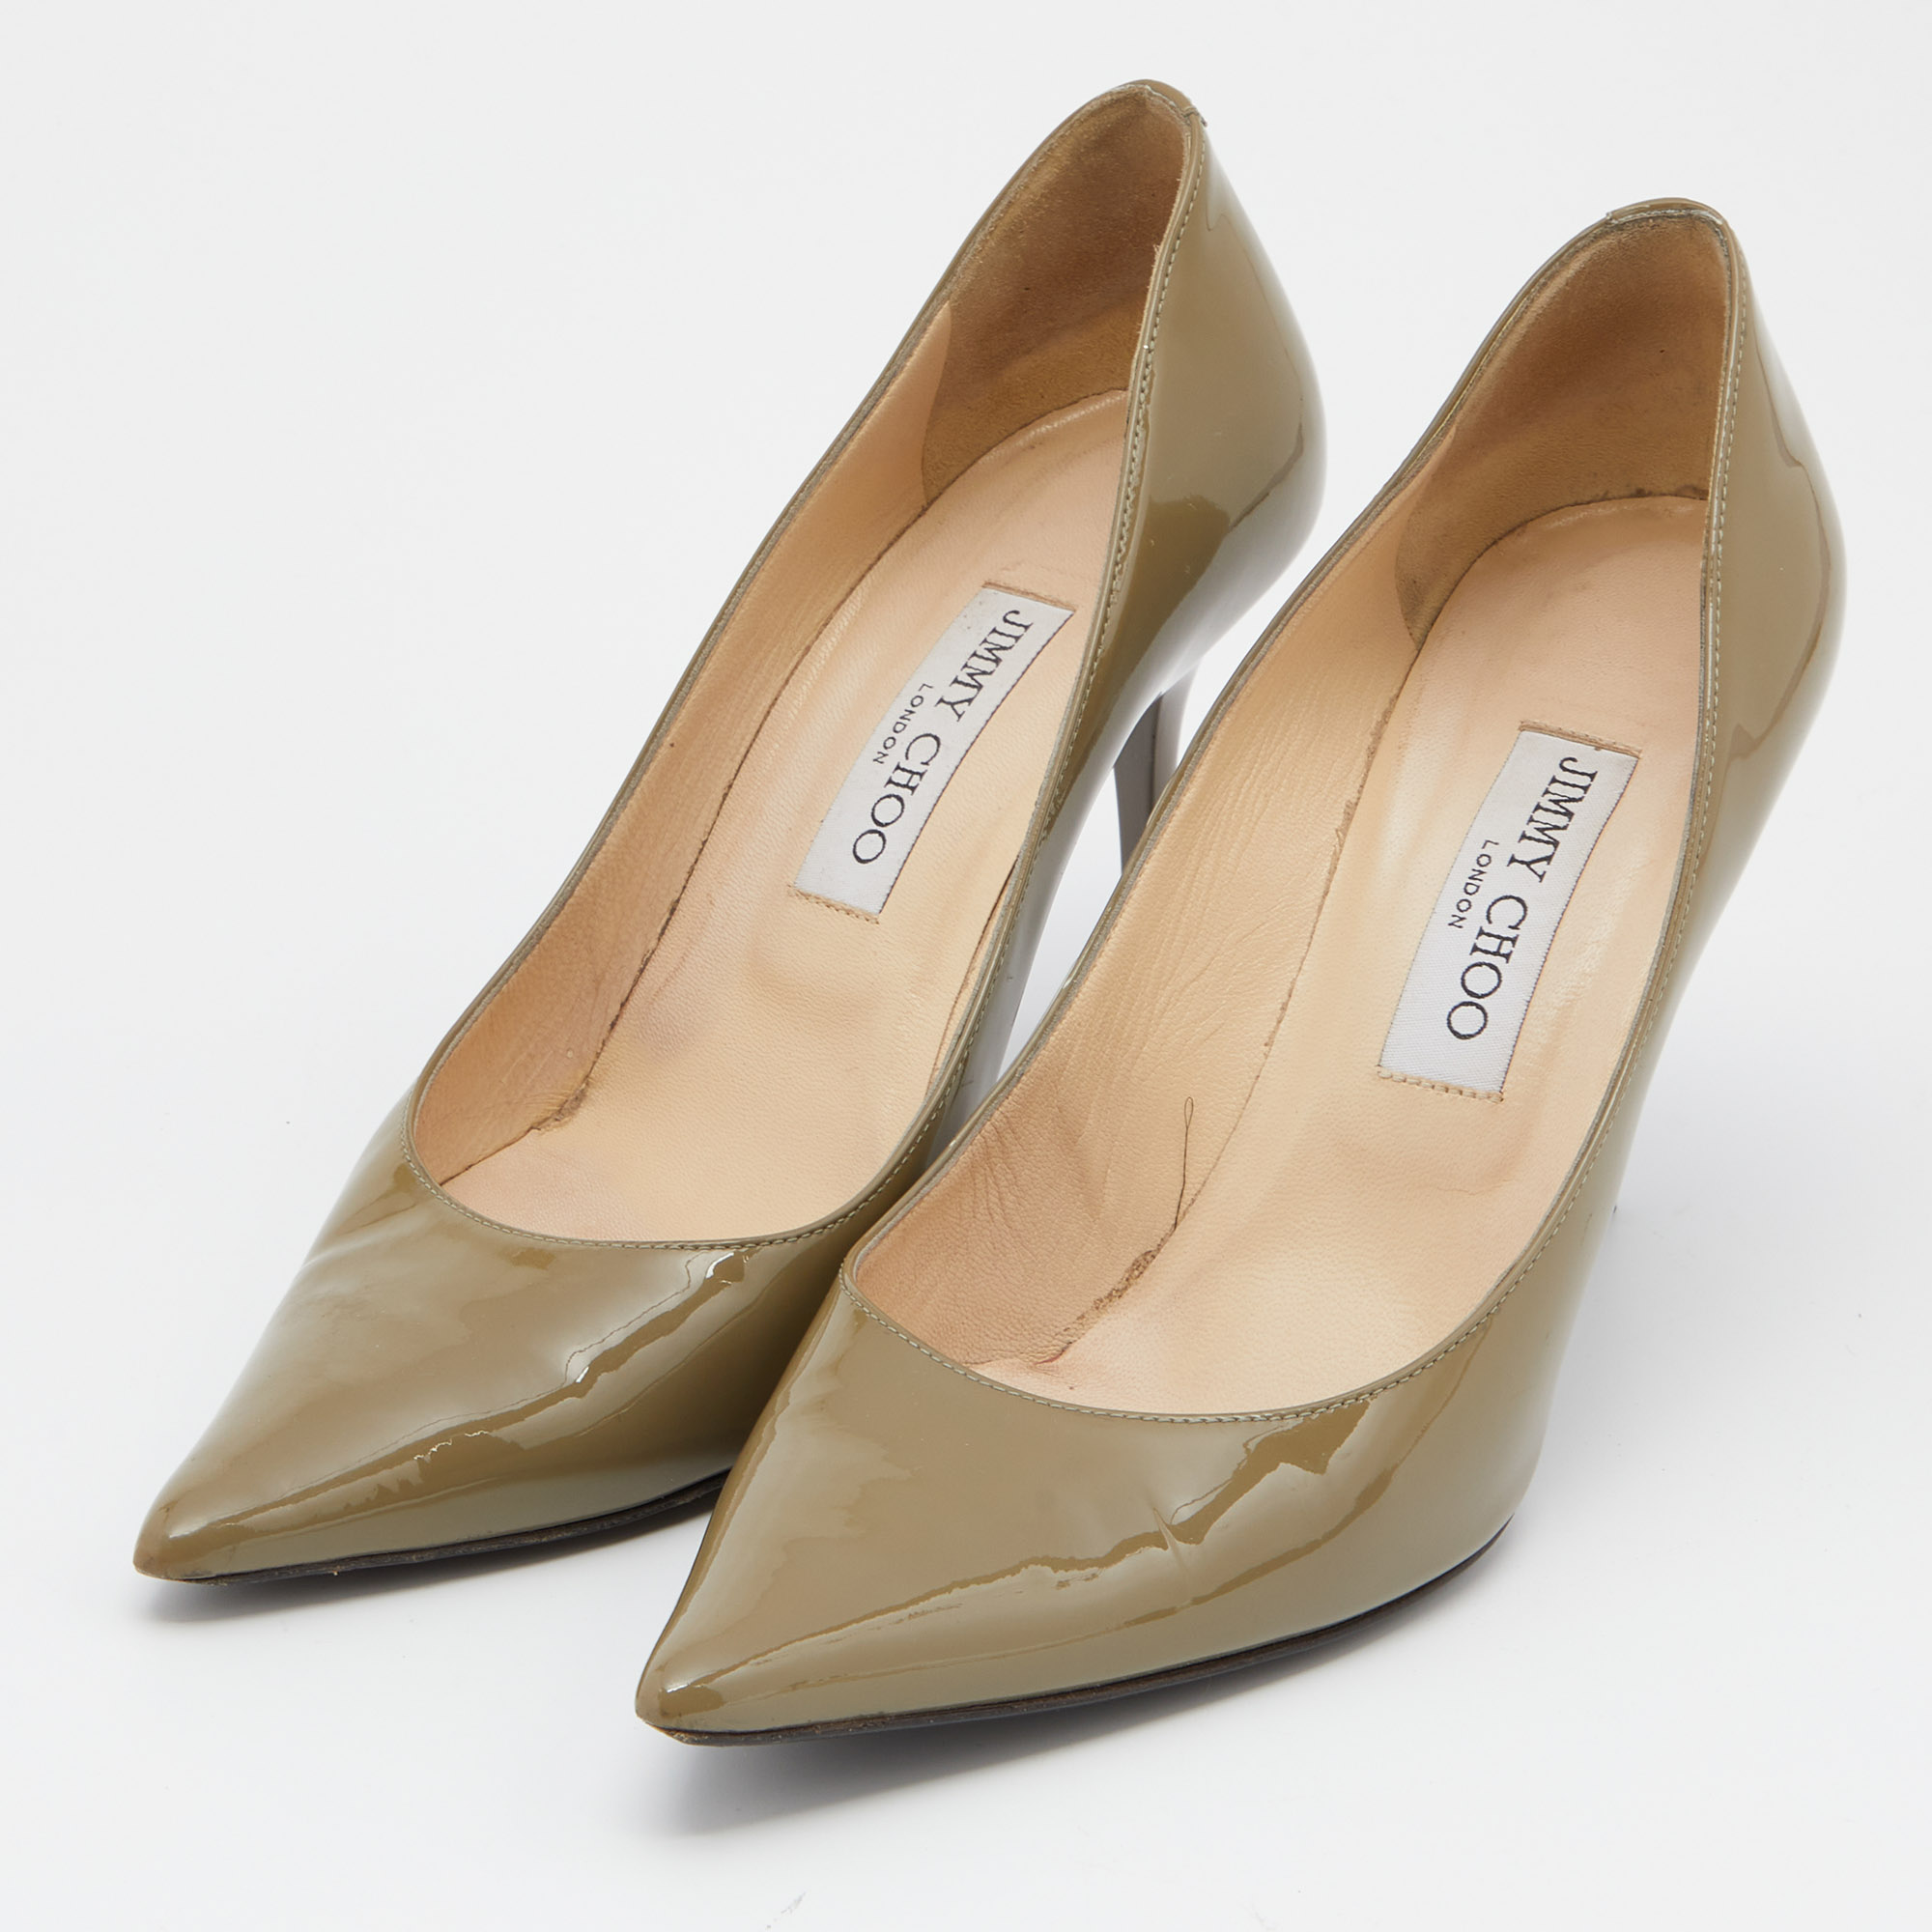 

Jimmy Choo Olive Green Patent Leather Love Pumps Size